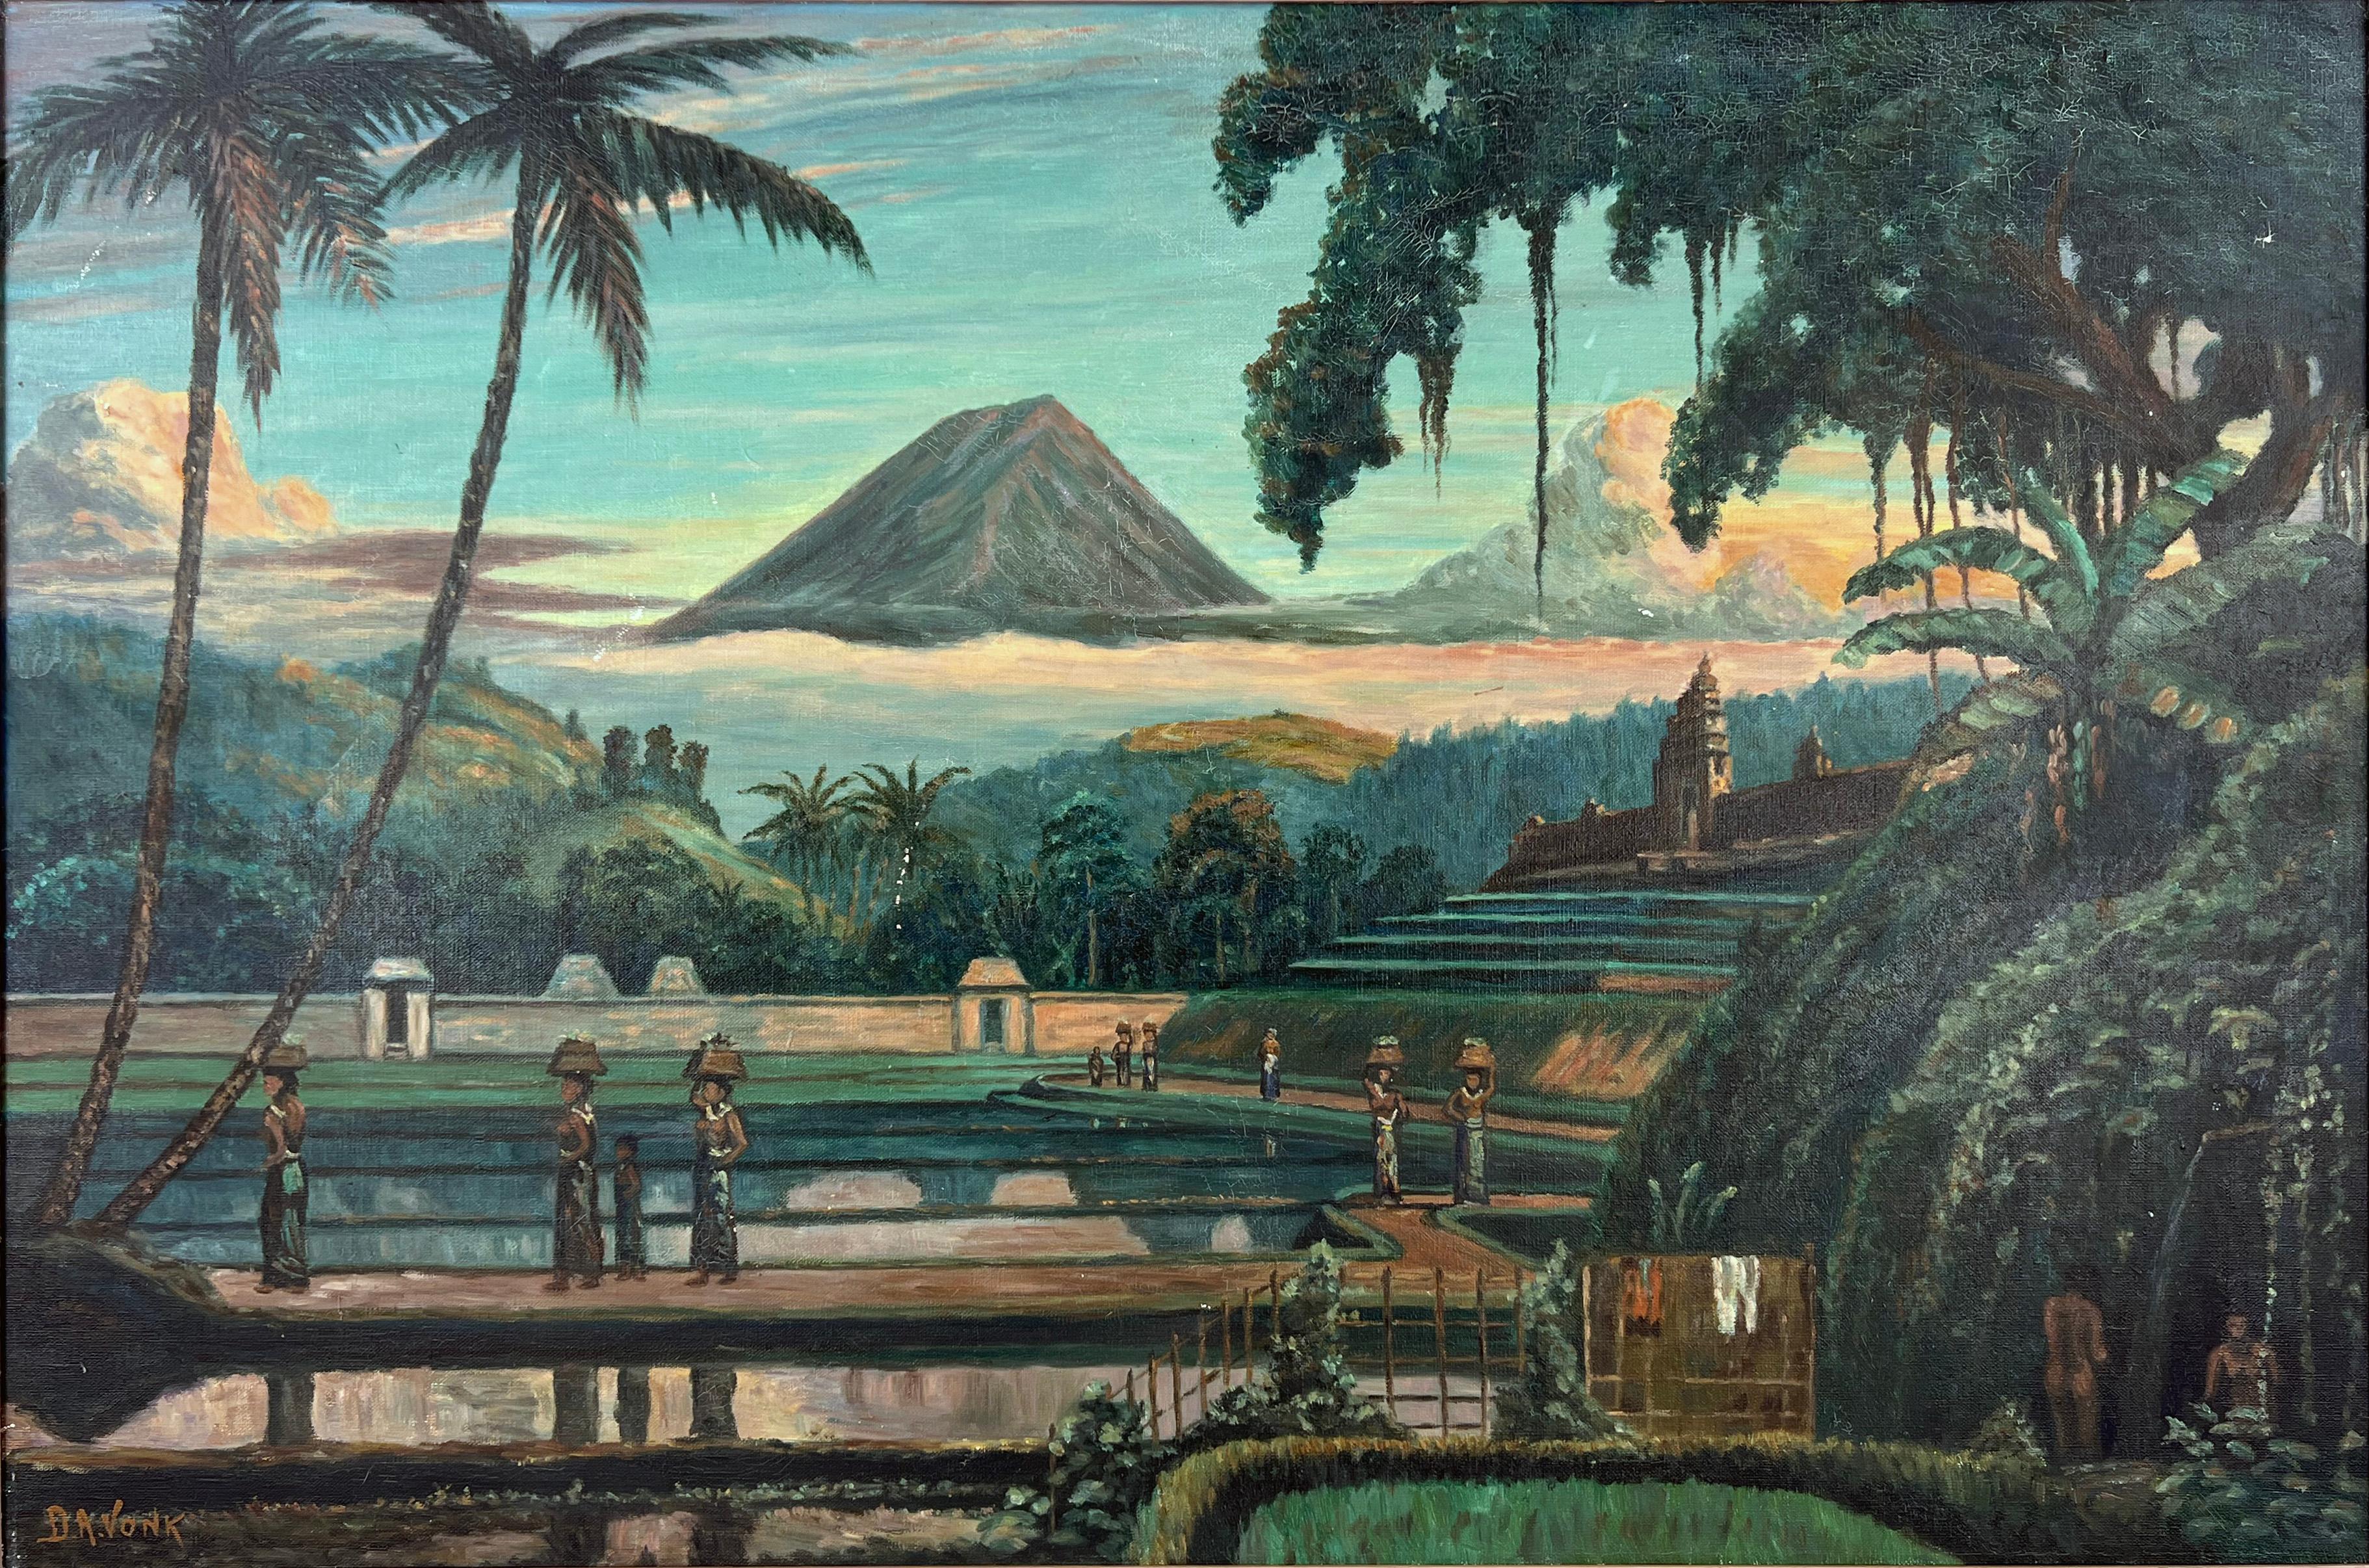 Mount Sumbing or Gunung Sumbing an Active volcano in Central Java, Indonesia - Impressionist Painting by D. A. Vonk